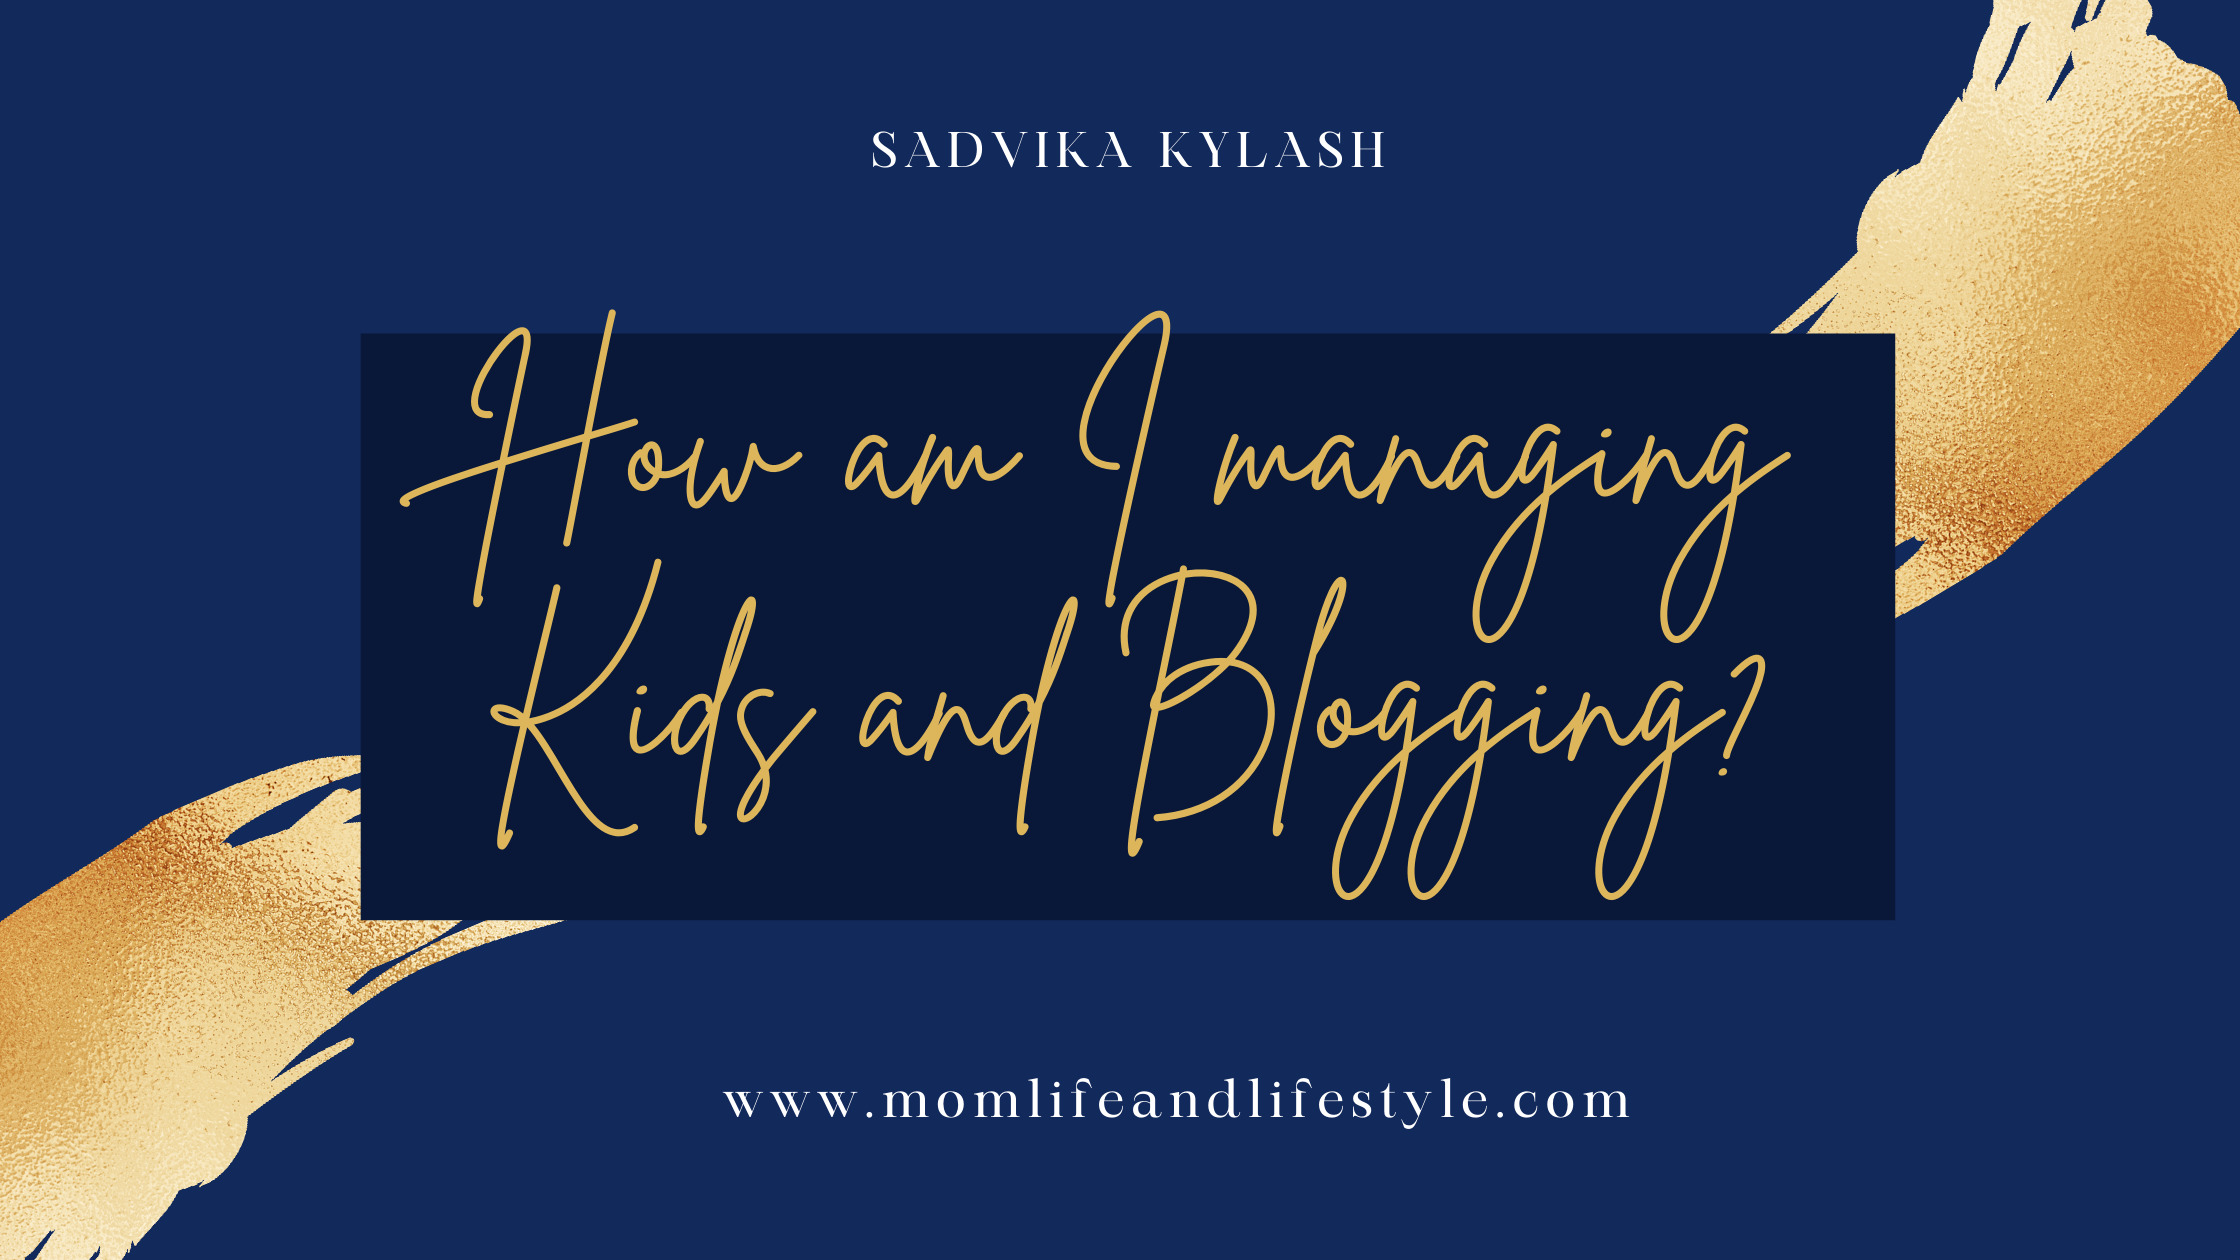 How I manage kids and blogging?